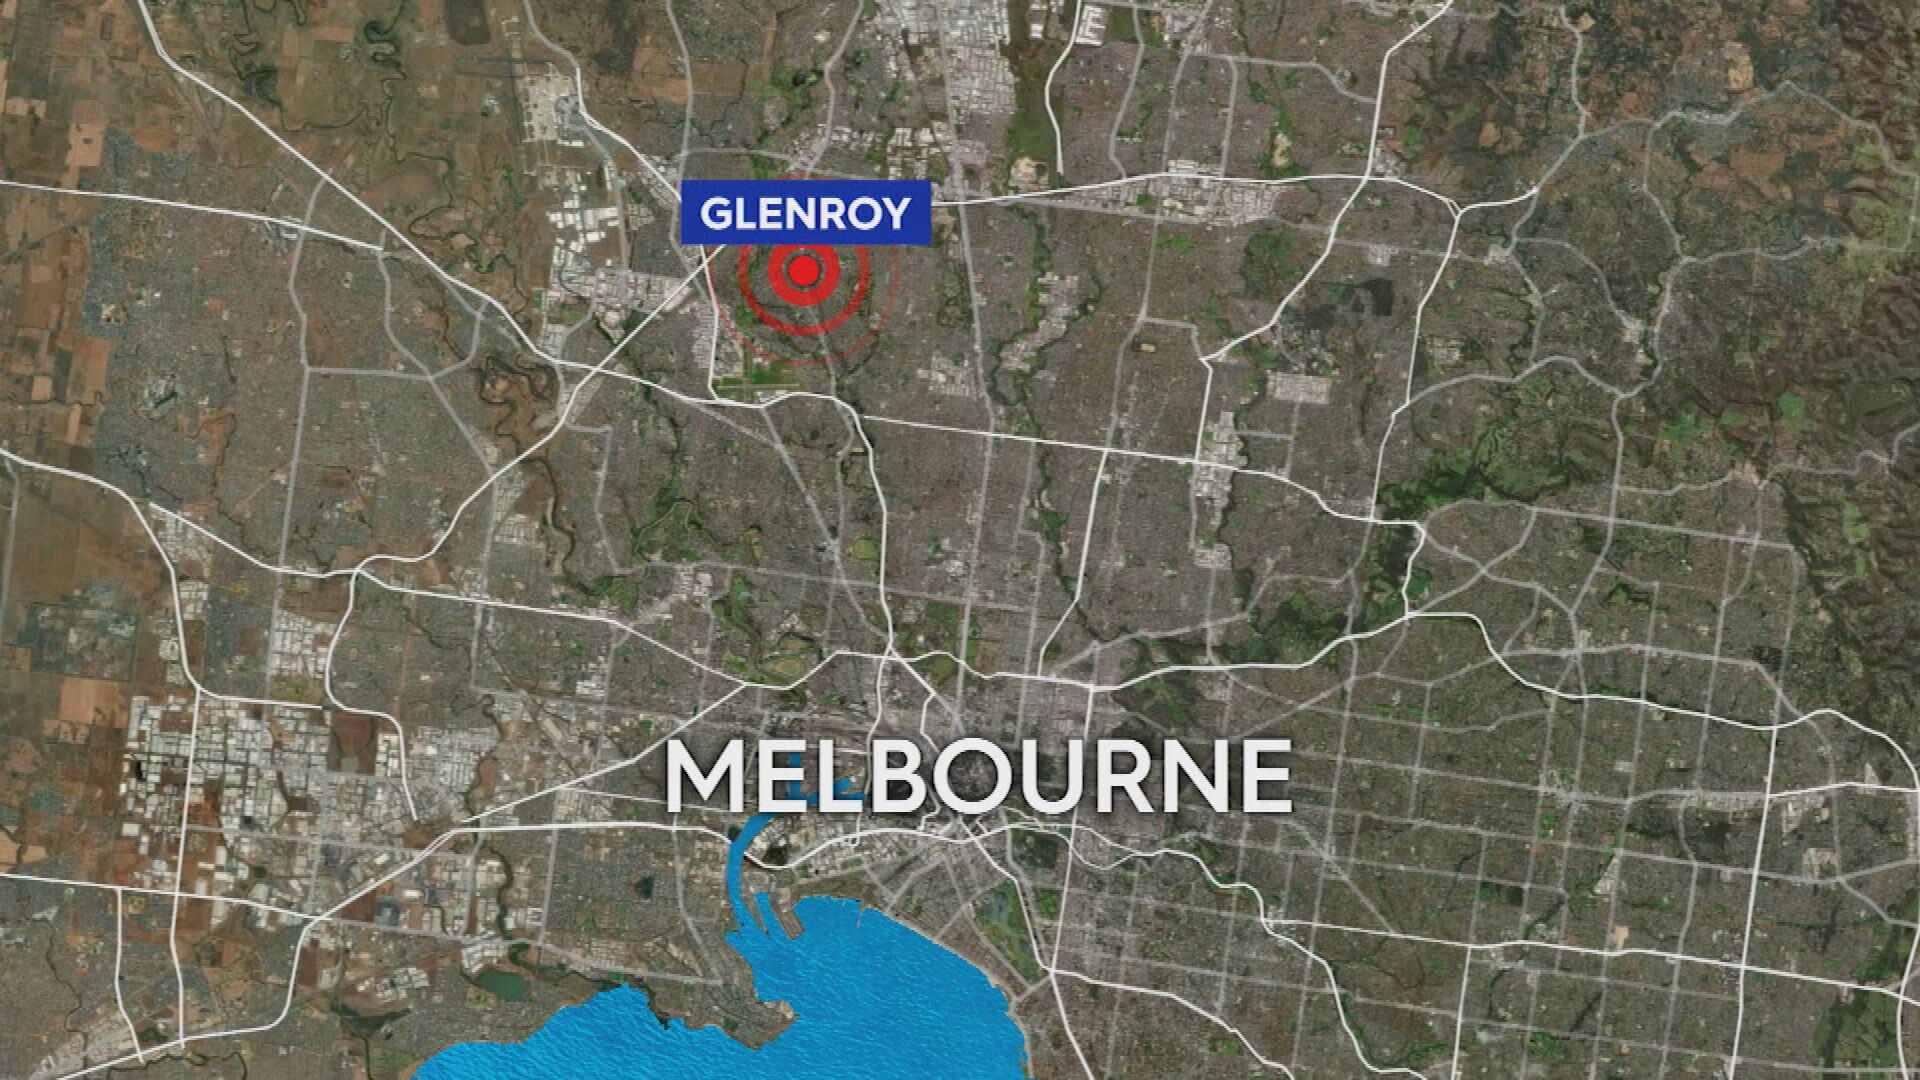 Man killed in shooting in Melbourne's north